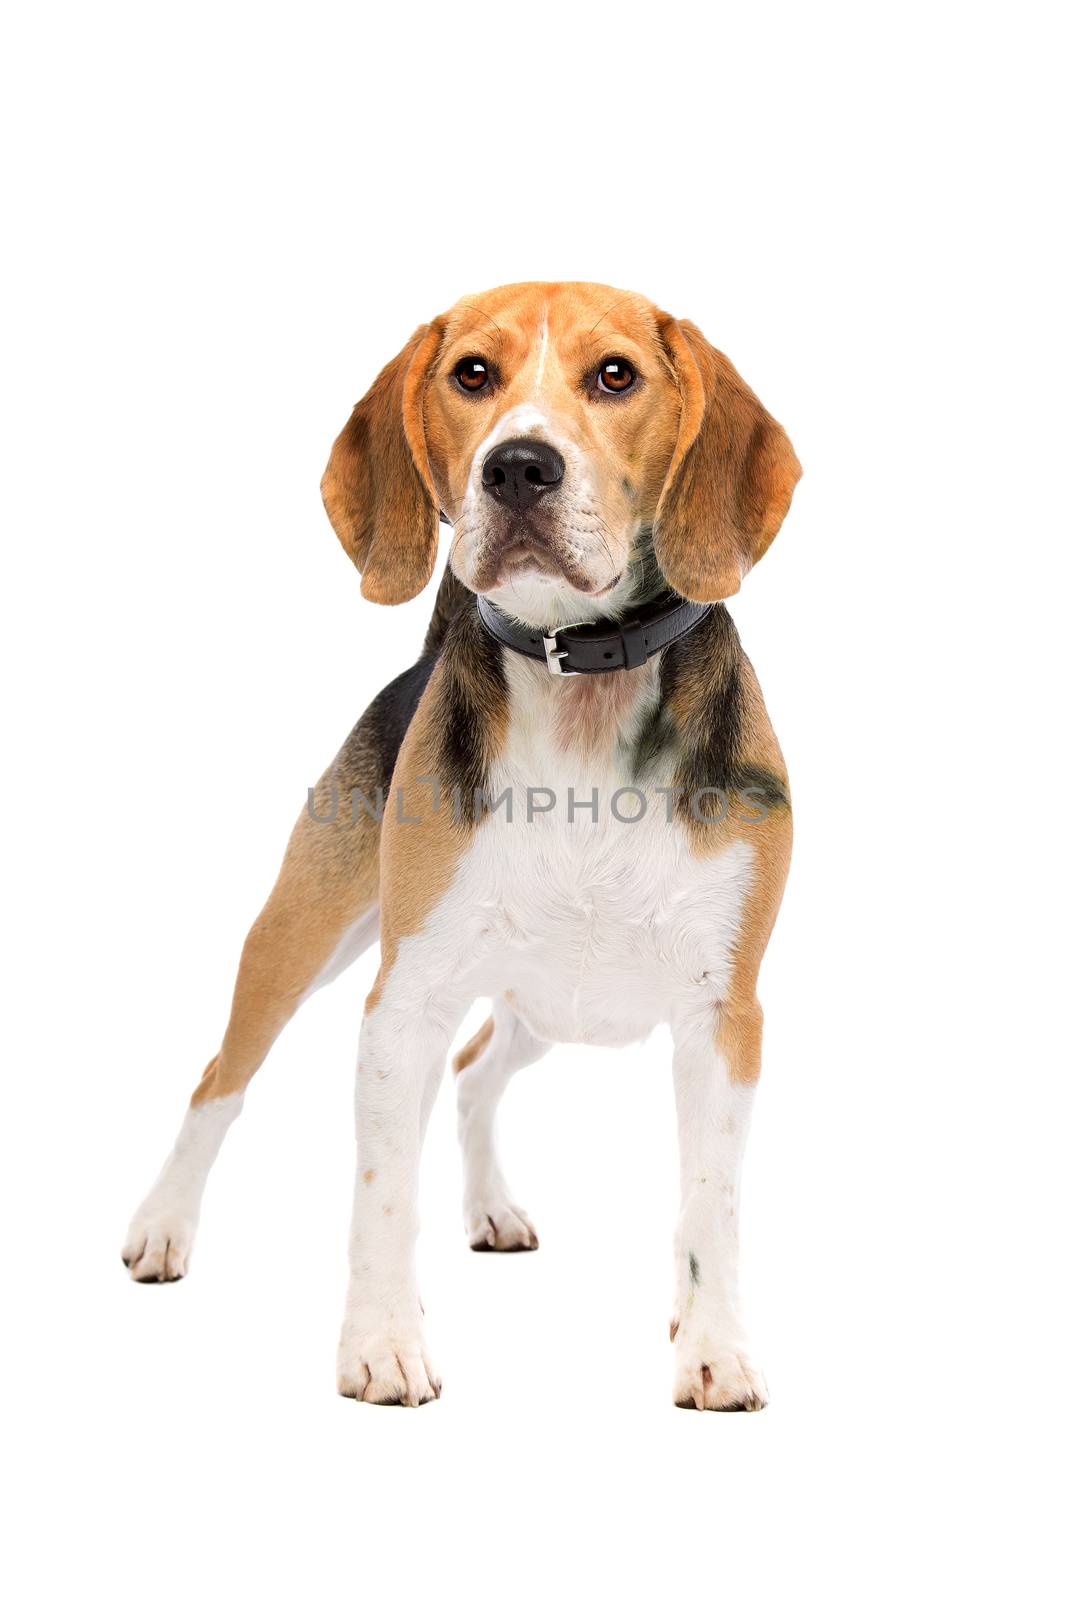 beagle dog standing in front of a white background